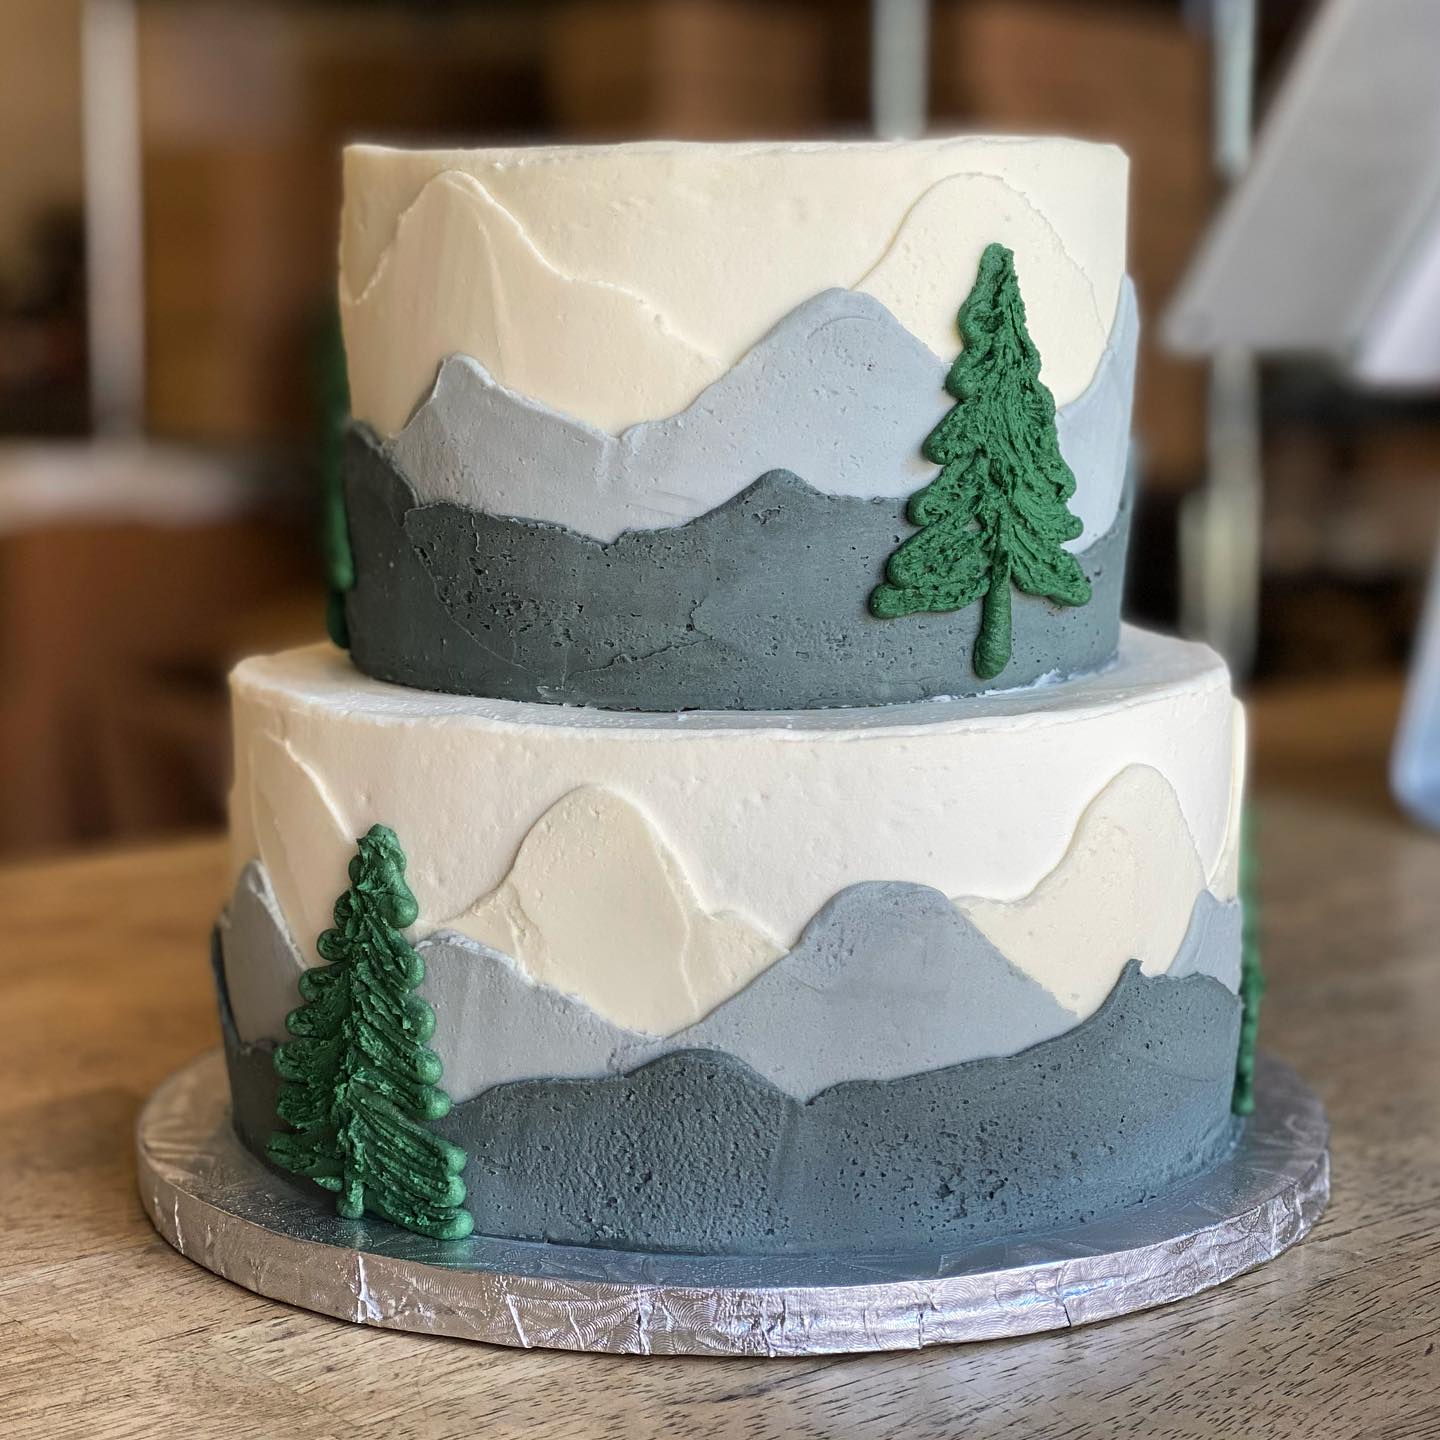 TK's Cakes | Golfing, fishing and hunting cake! I love the transition in  these tiers and how the water theme is in the middle! The painted mountain  co... | Instagram